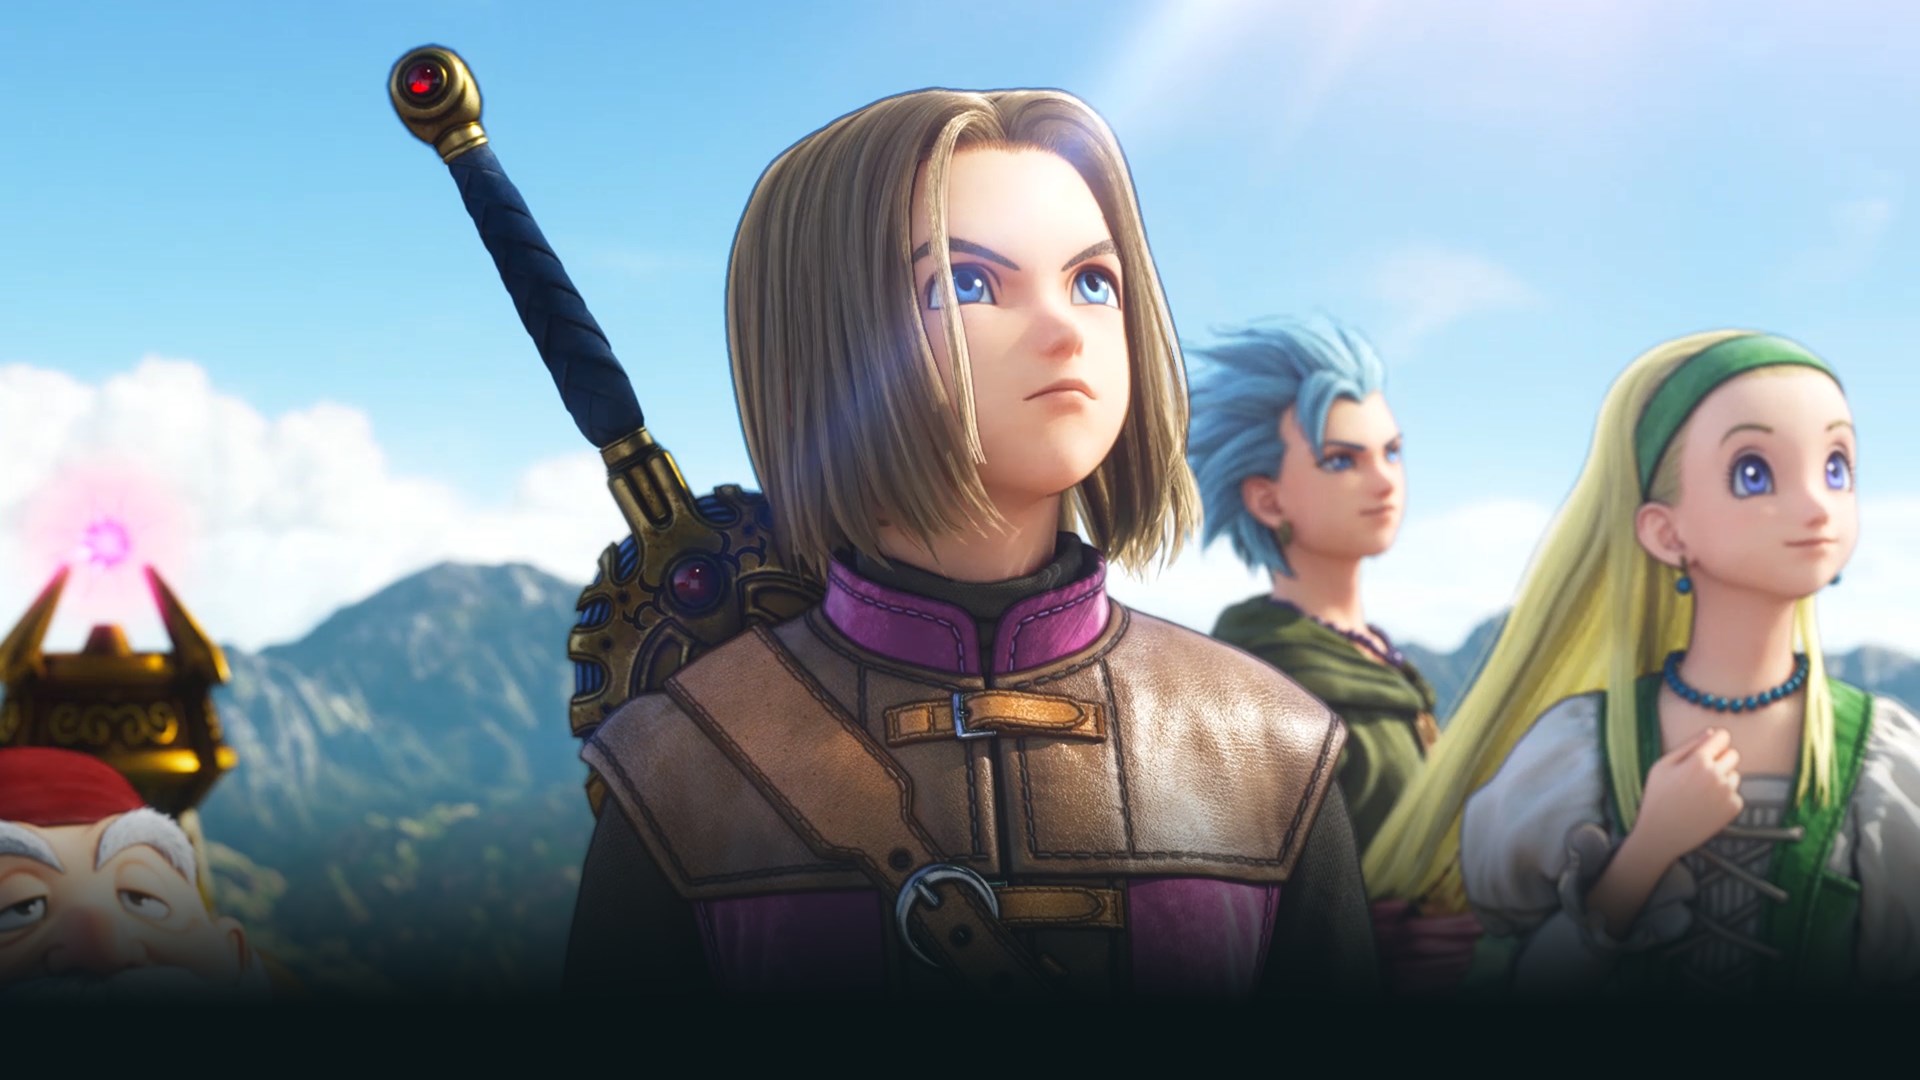 dragon-quest-xi-s-echoes-of-an-elusive-age-official-definitive